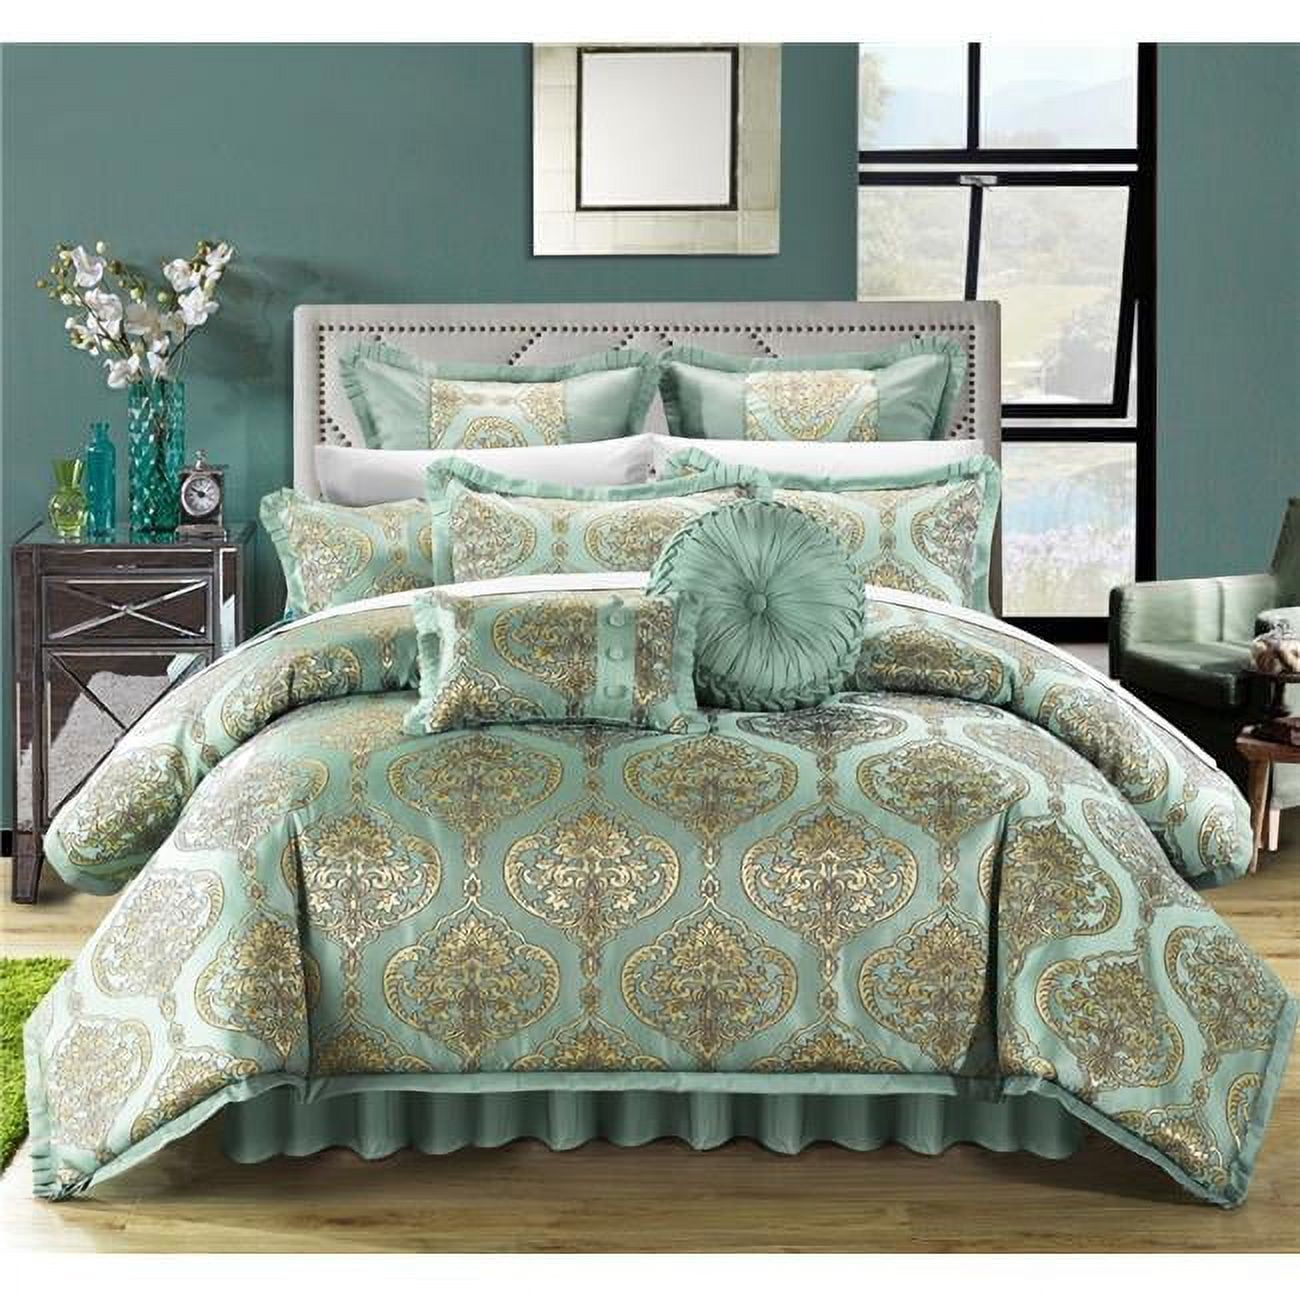 13 Piece Bonito Decorator Upholstery Quality Jacquard Motif Fabric Complete Master Bedroom & Pillows King Bed In A Bag Comforter Set, Blue